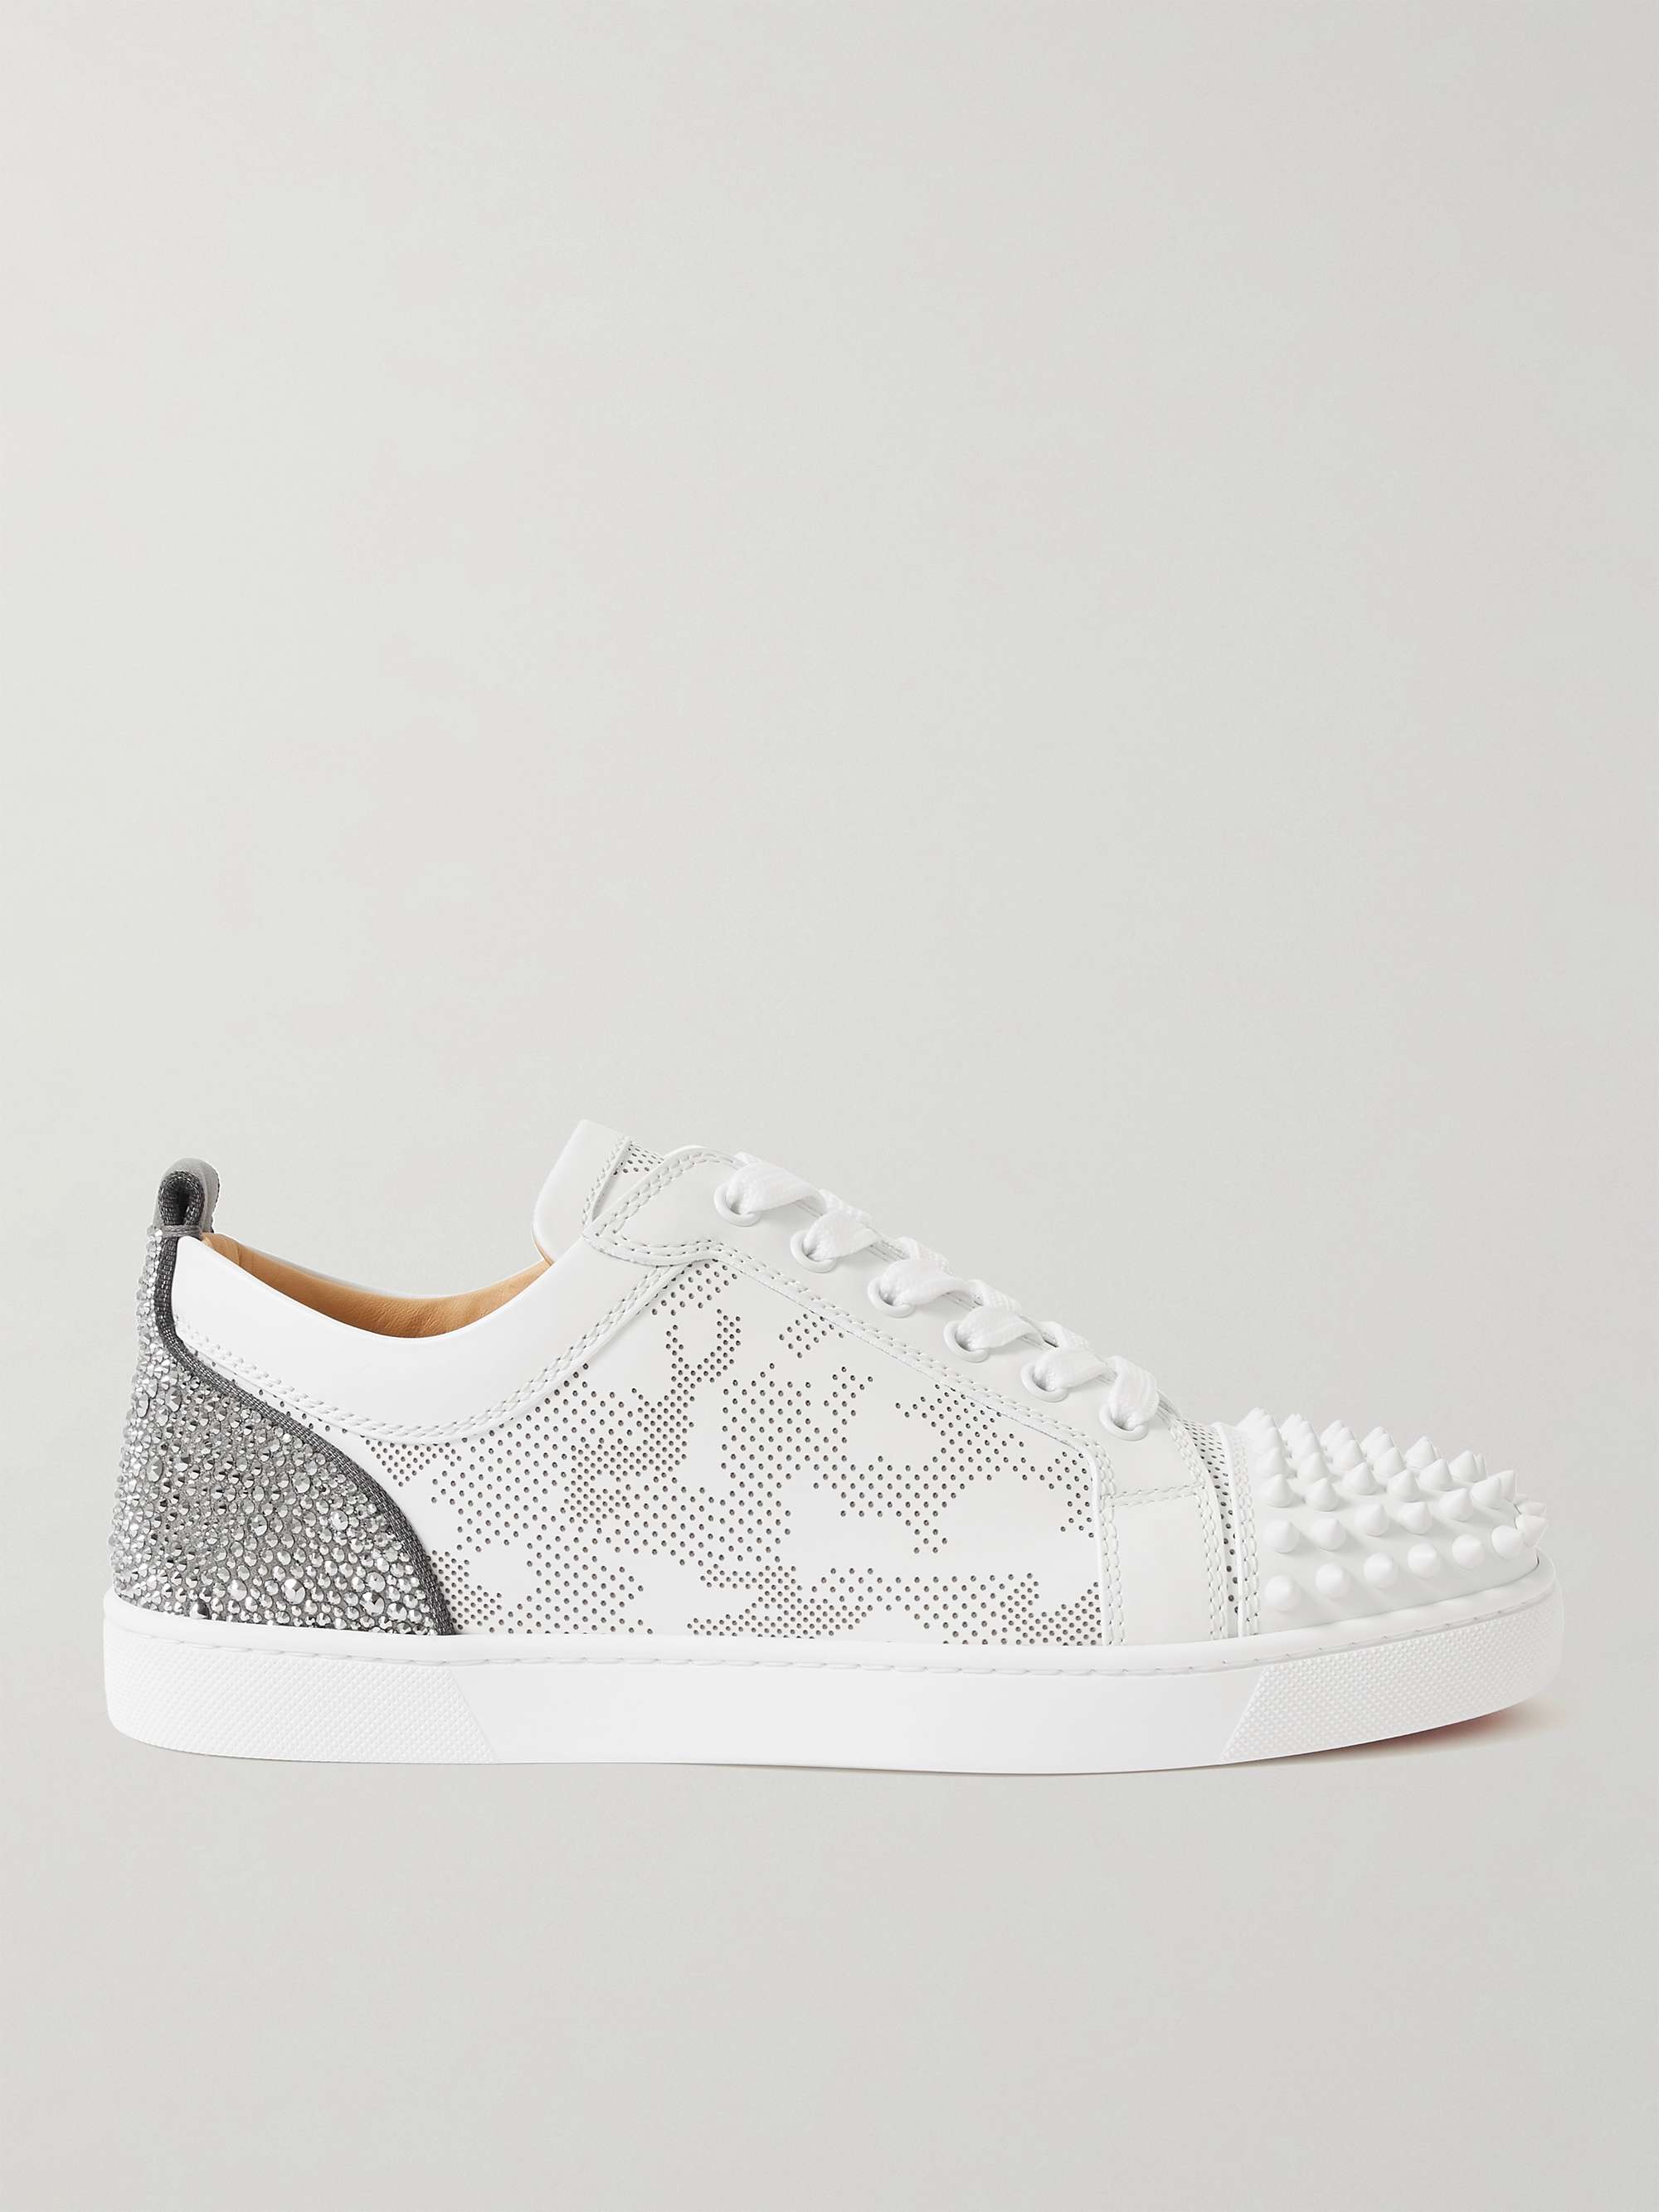 CHRISTIAN LOUBOUTIN Louis Junior Spikes Embellished Perforated Leather  Sneakers | MR PORTER